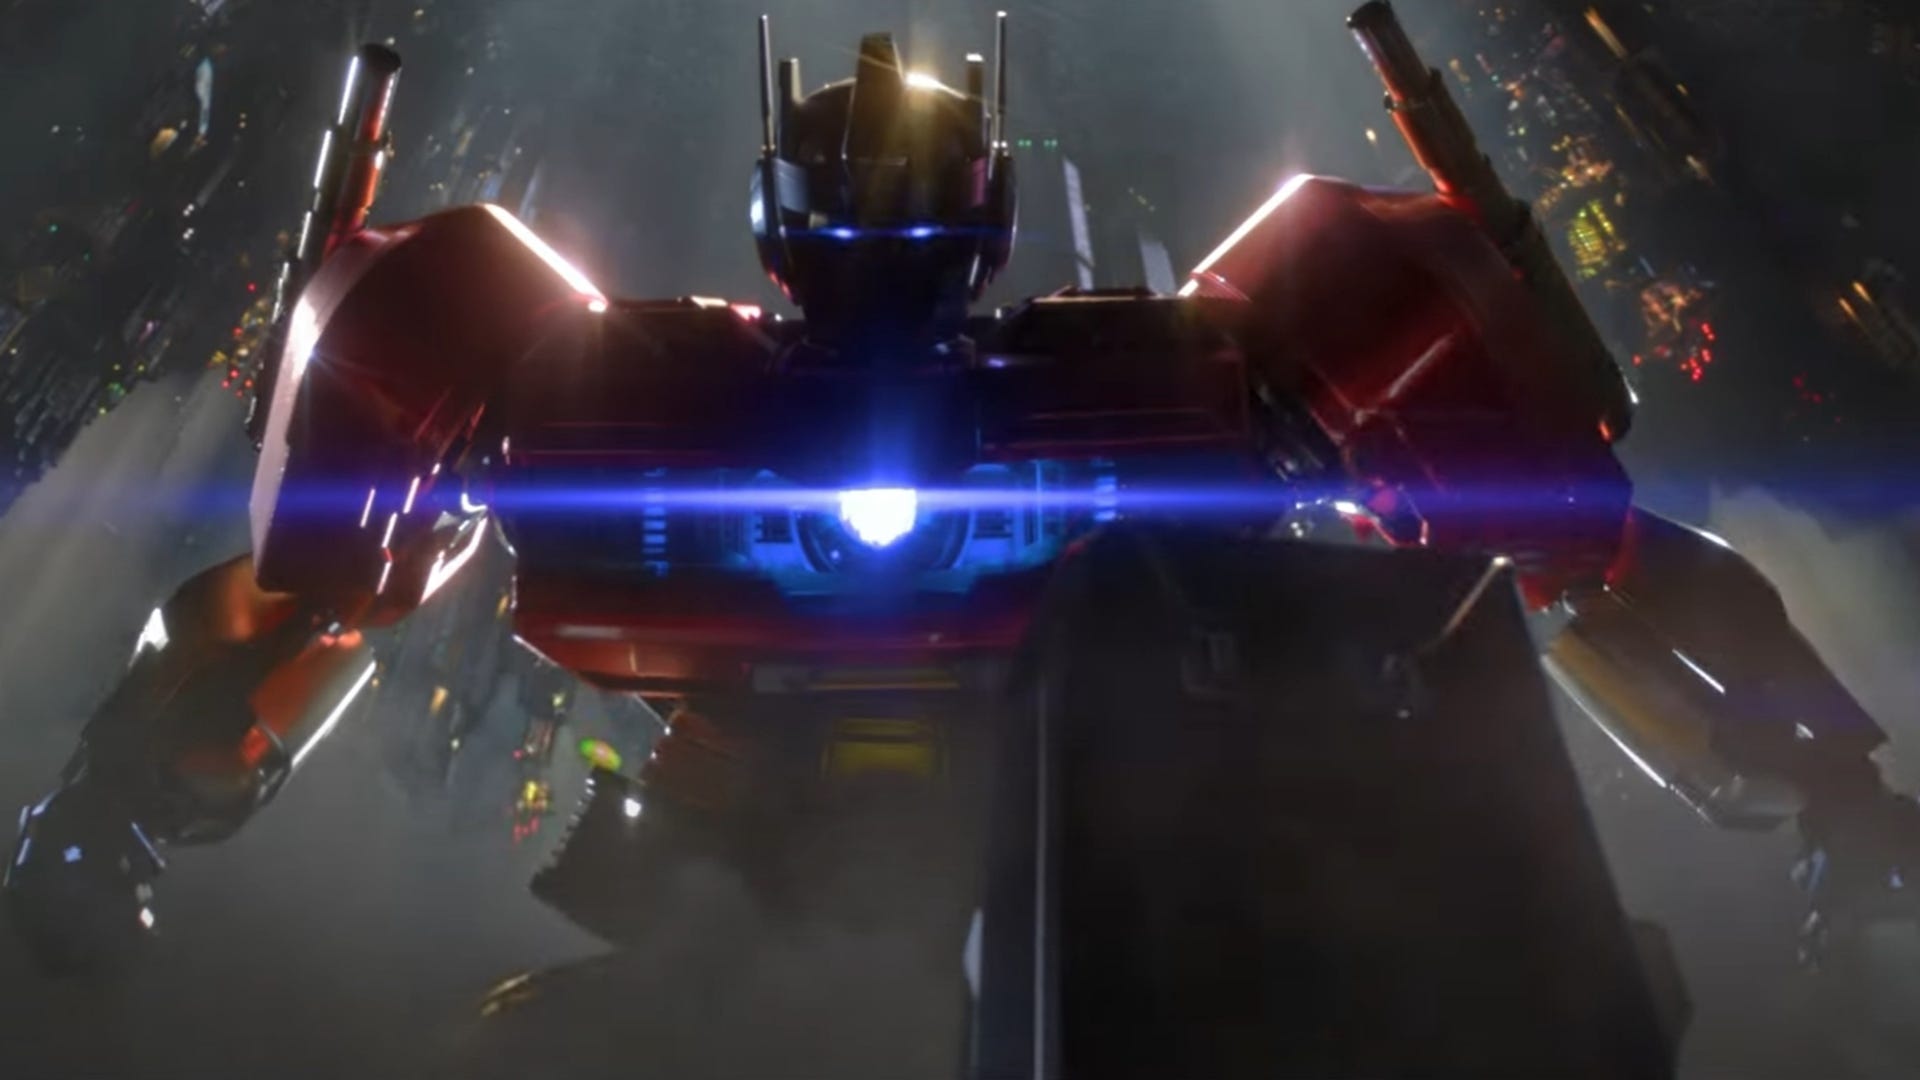 Transformers One’s first trailer presents an animated buddy action-comedy on Cybertron